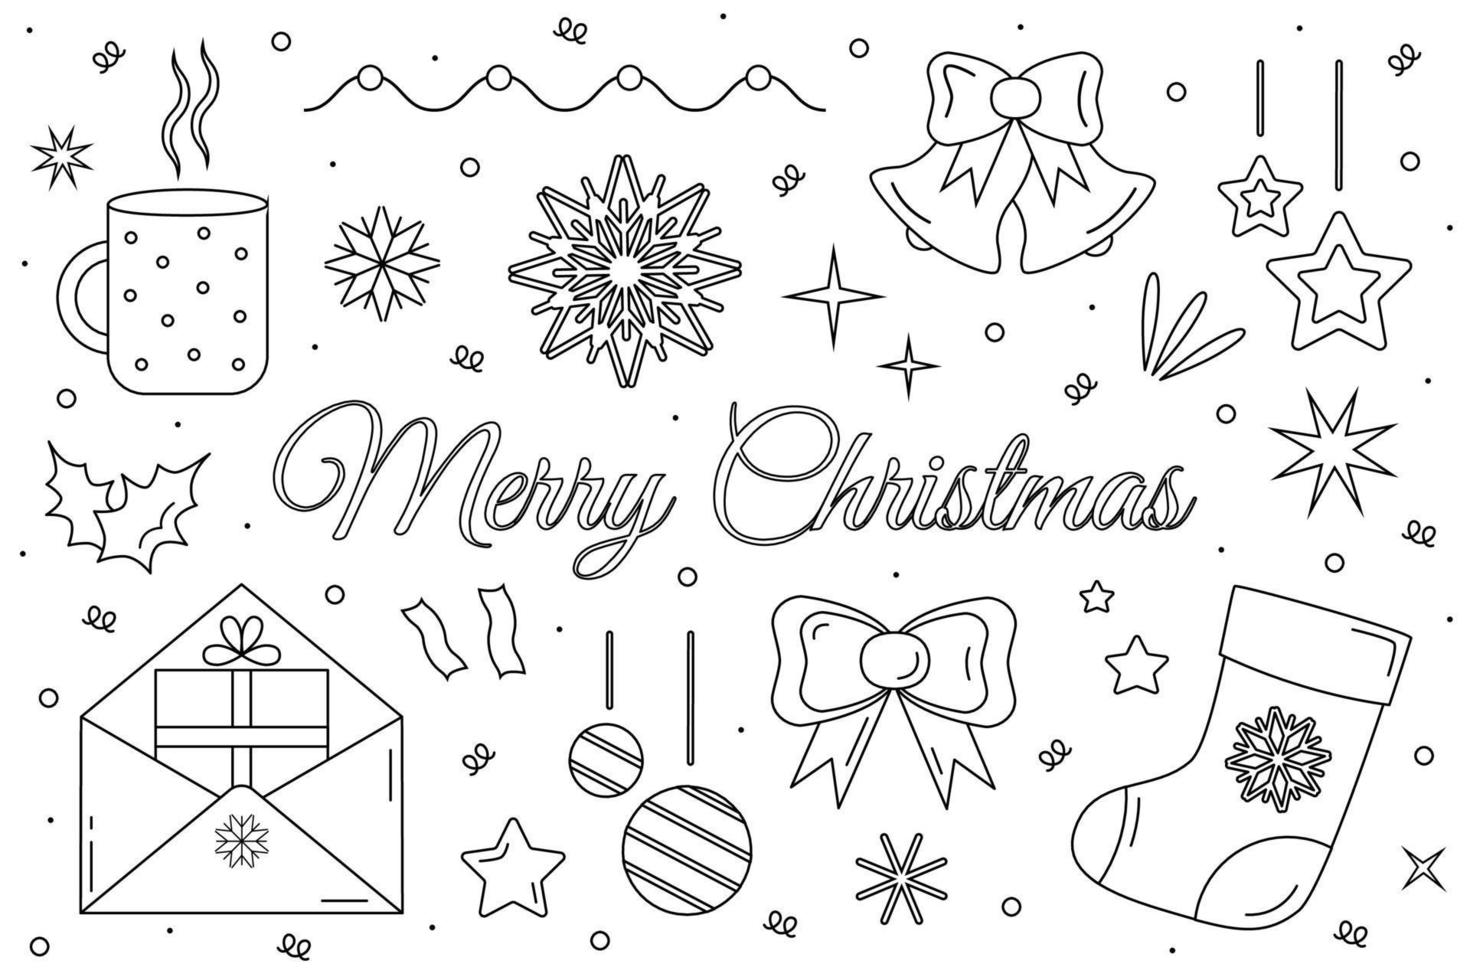 Christmas elements set. Drawing of New Year decorations. Merry Christmas design text. Isolated vector outline illustration.